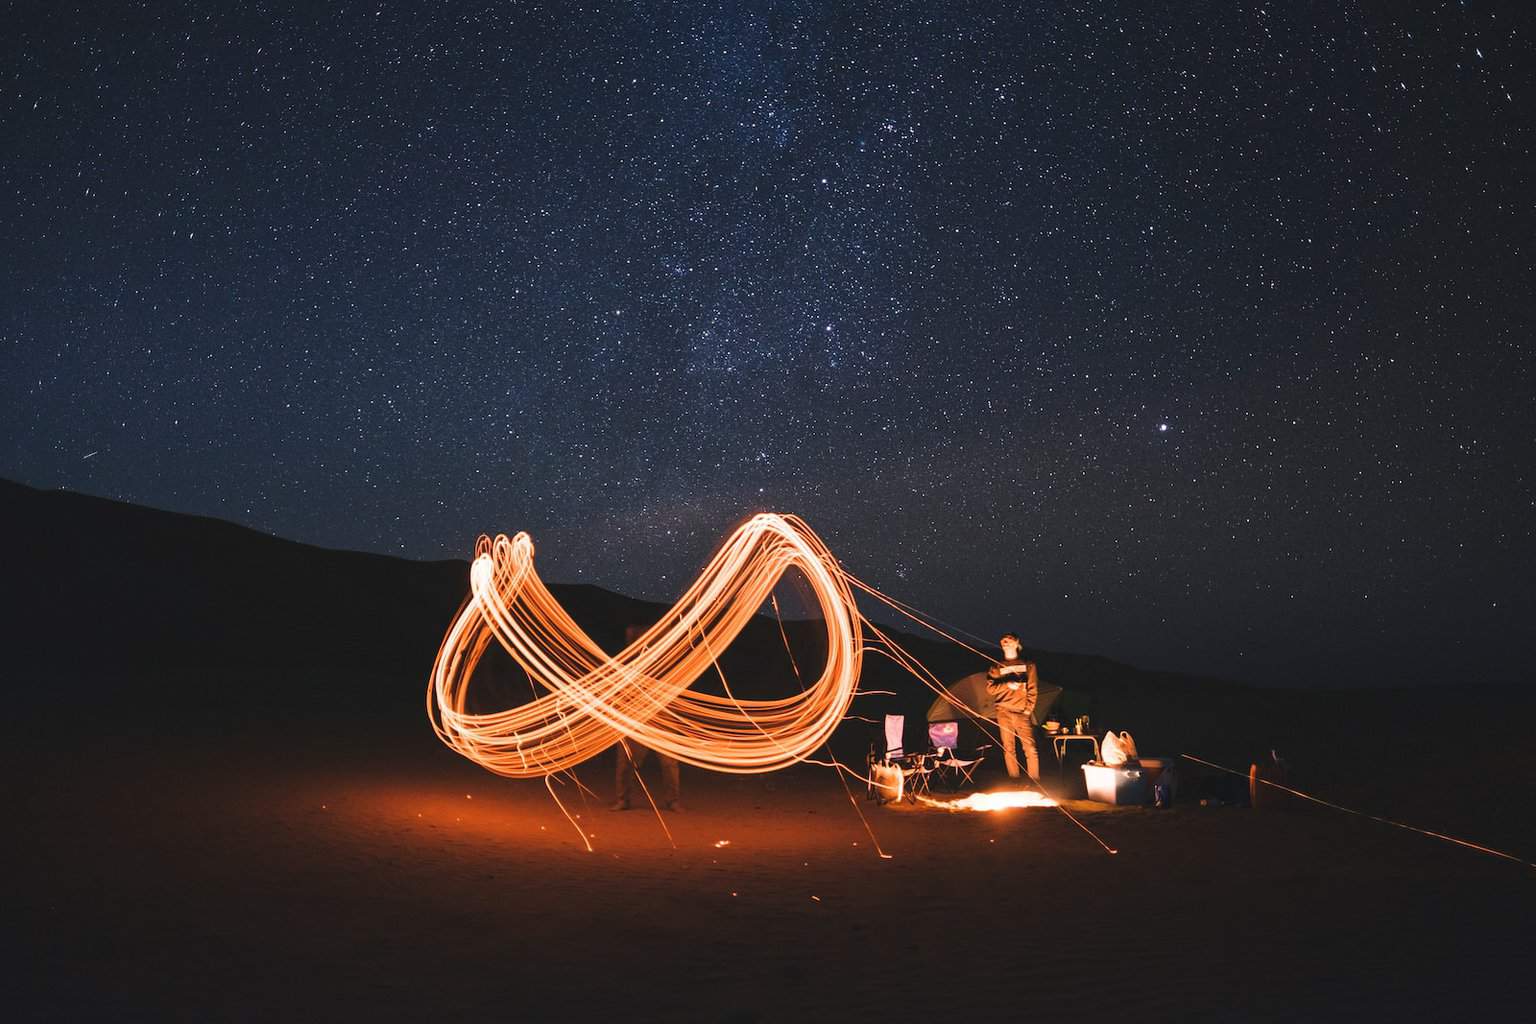 timelapse photography of steel wool fire dancing at night